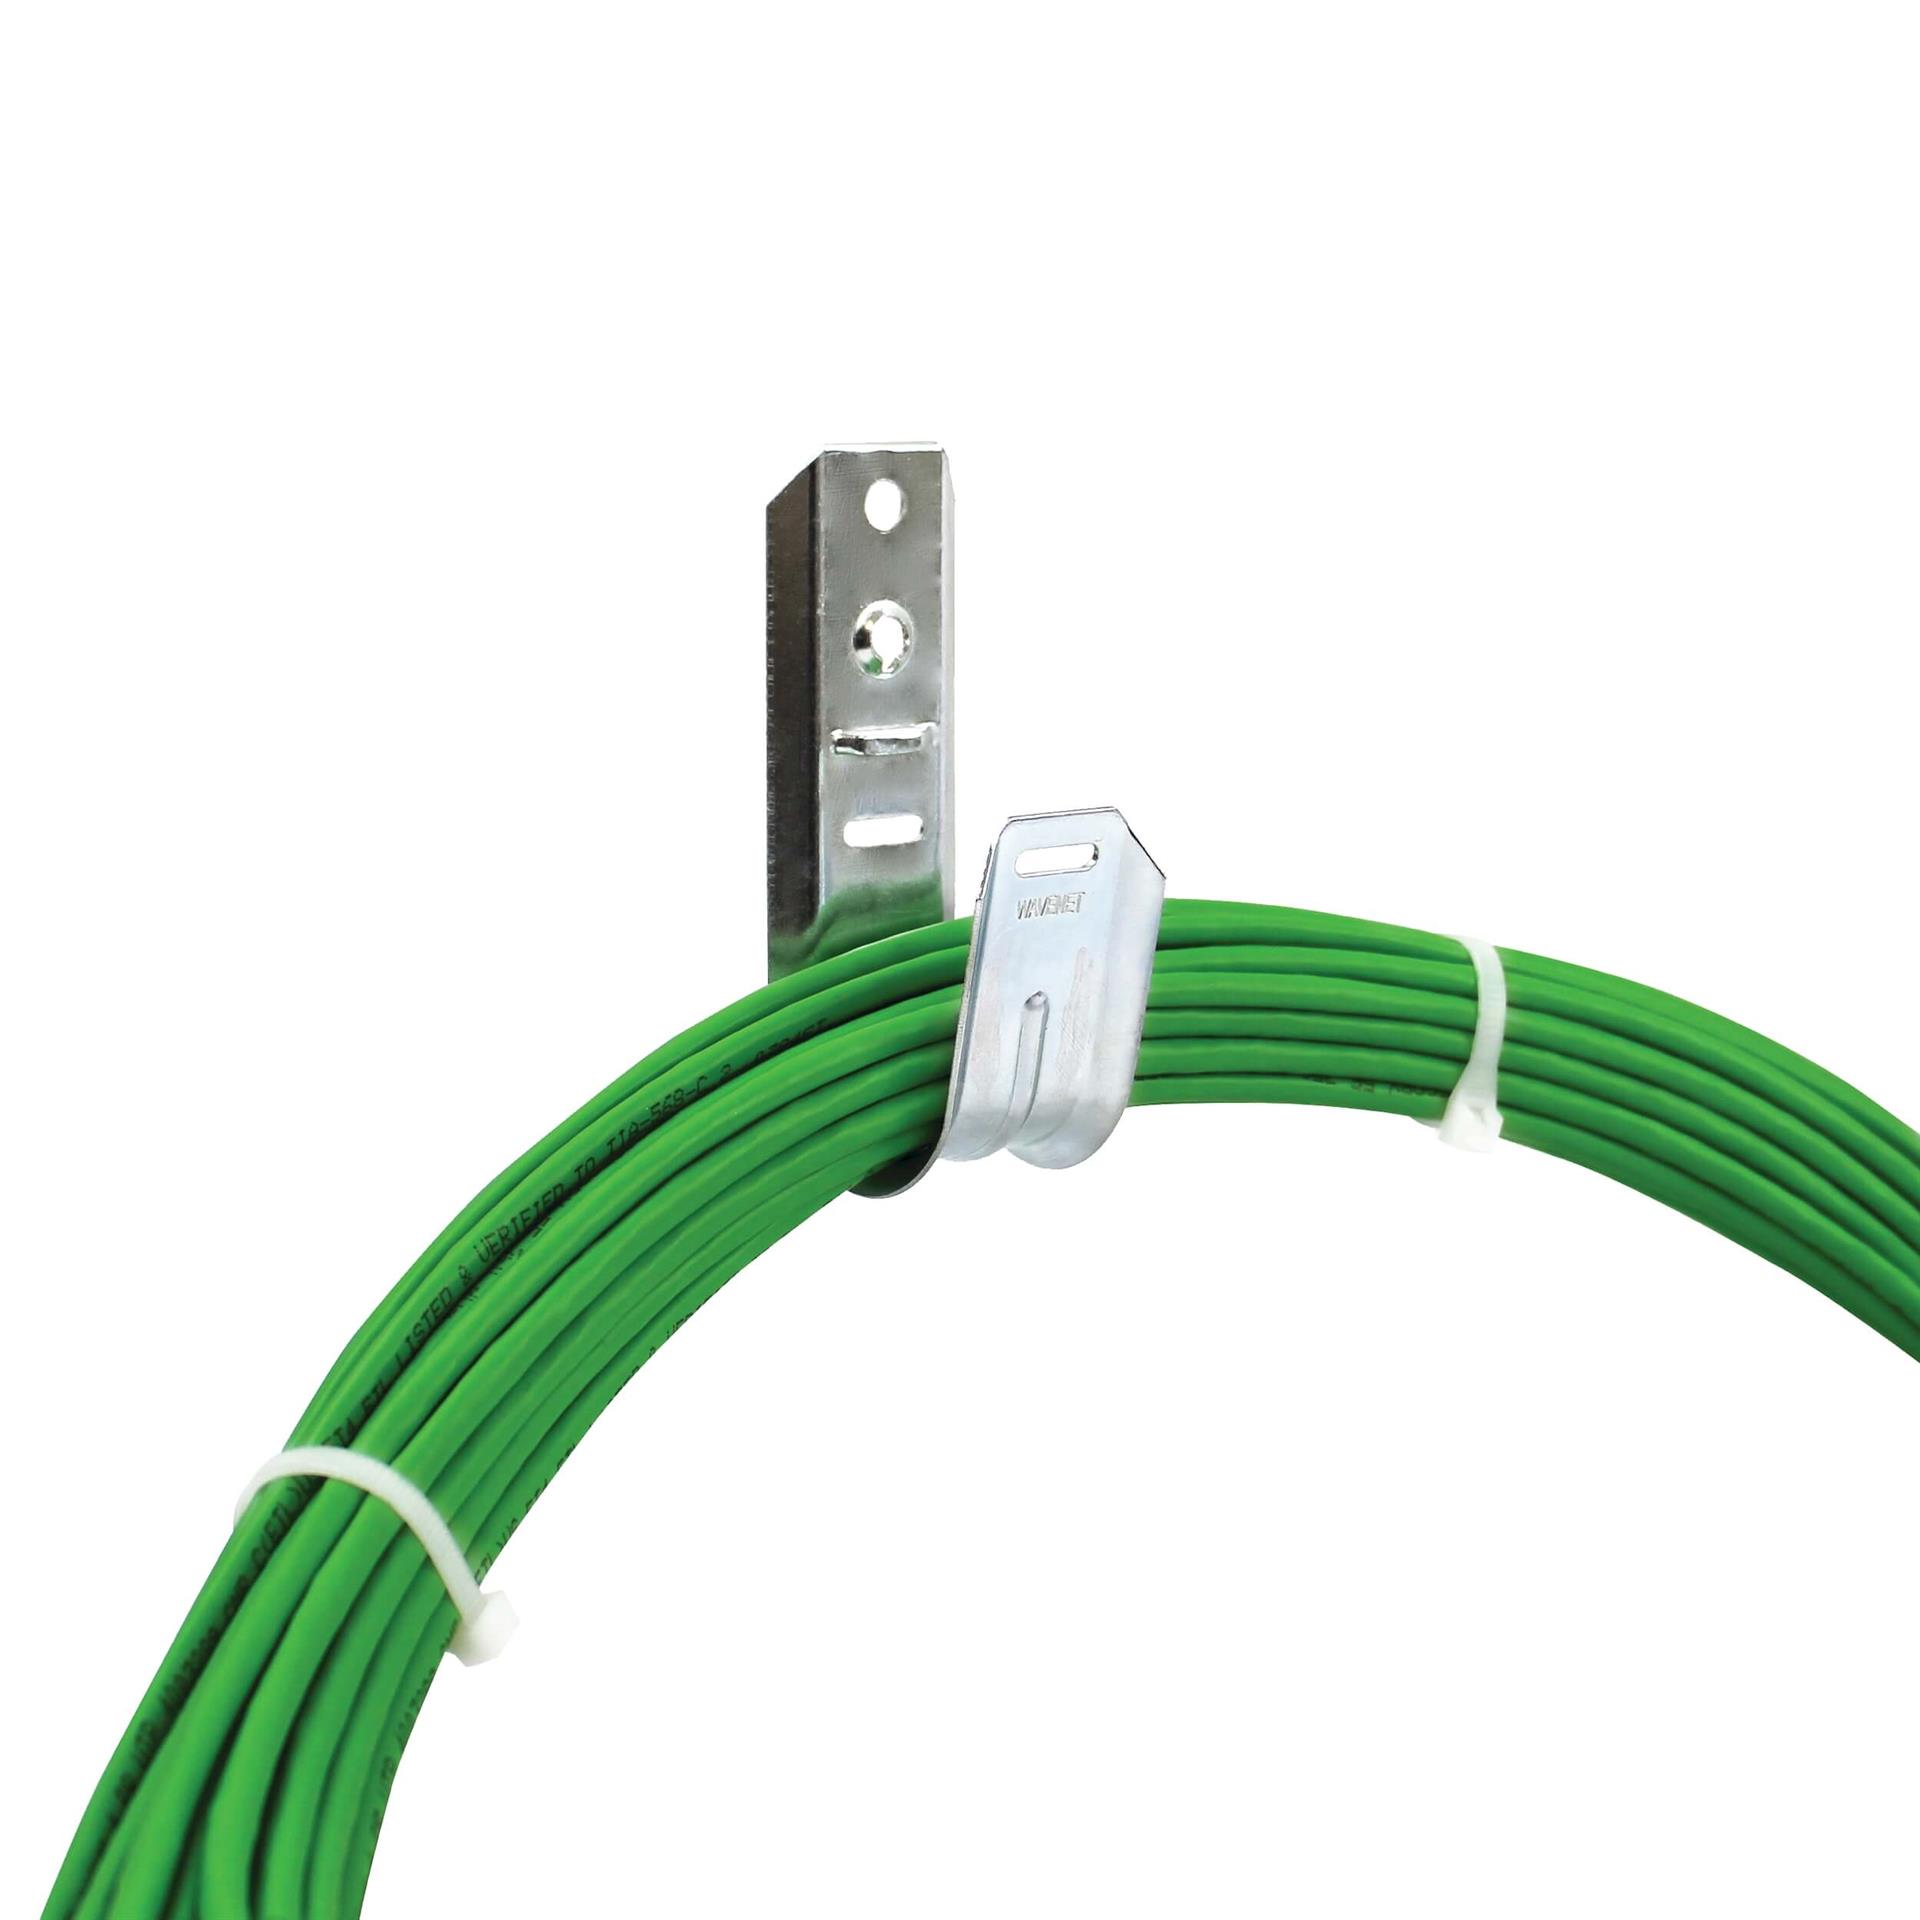 https://www.cmple.com/content/images/thumbs/wavenet-1-516-j-hook-cable-support-wall-mount-wiring-retainer-with-fix-clip-for-cat6-cat5e-optic-net_NID0015598.jpeg